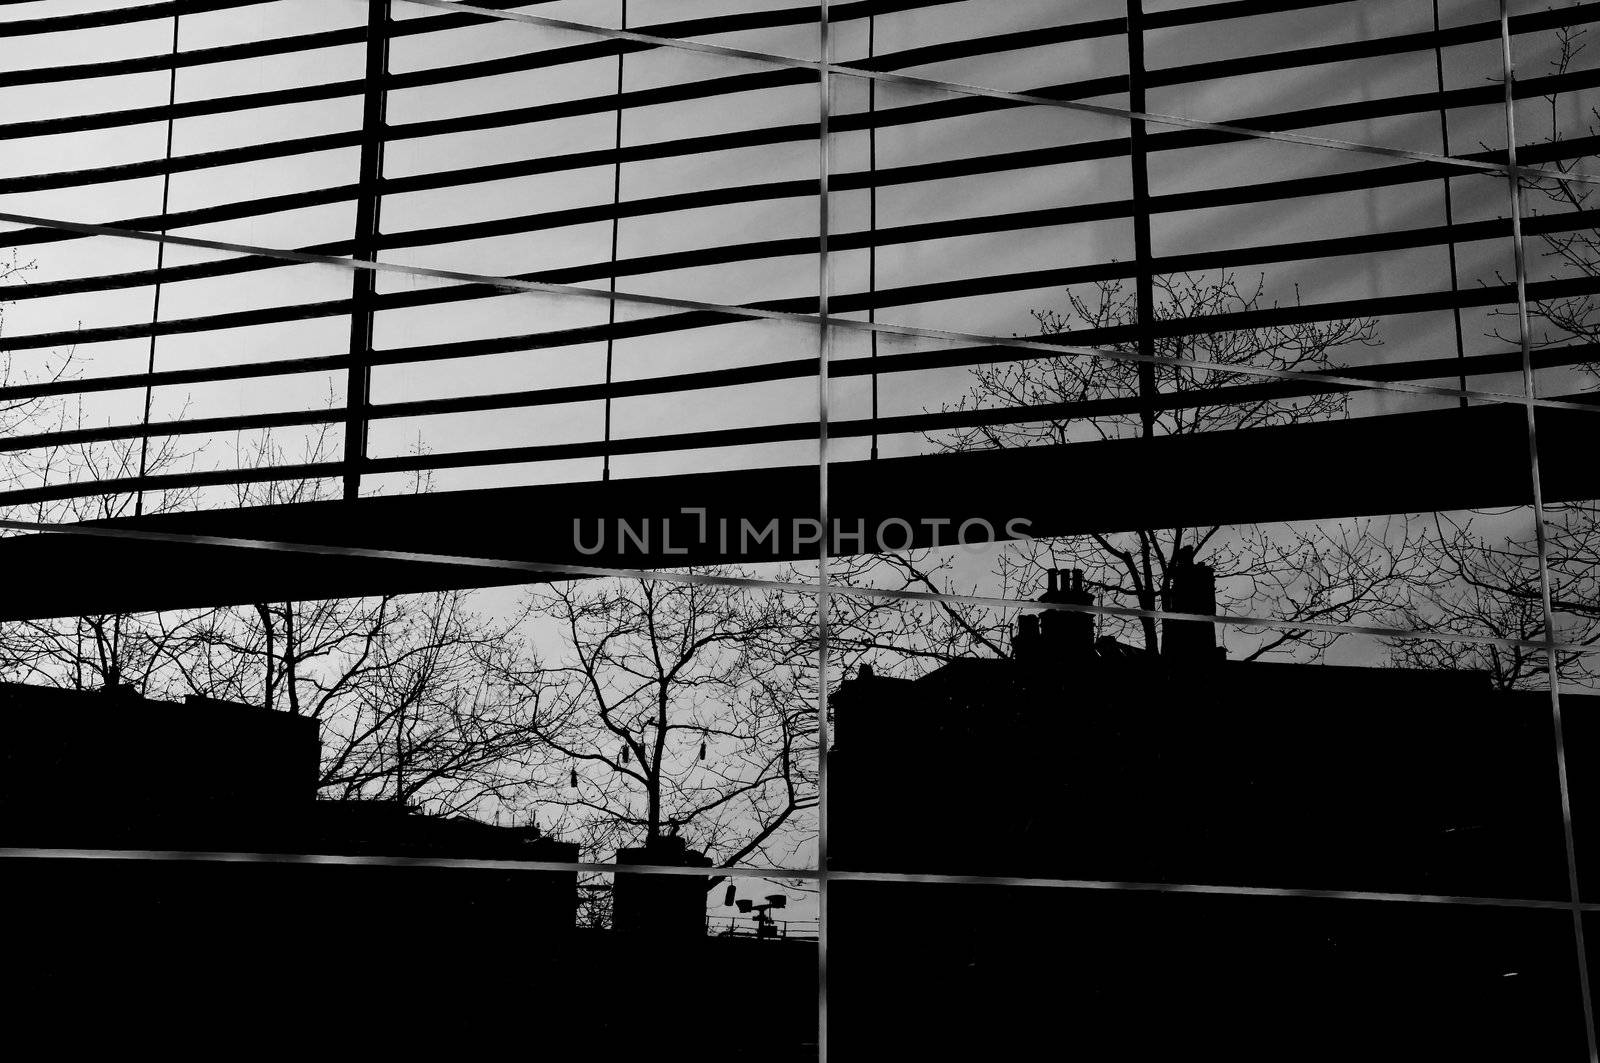 Reflection of buildings and trees on a glass facade, black and white photography